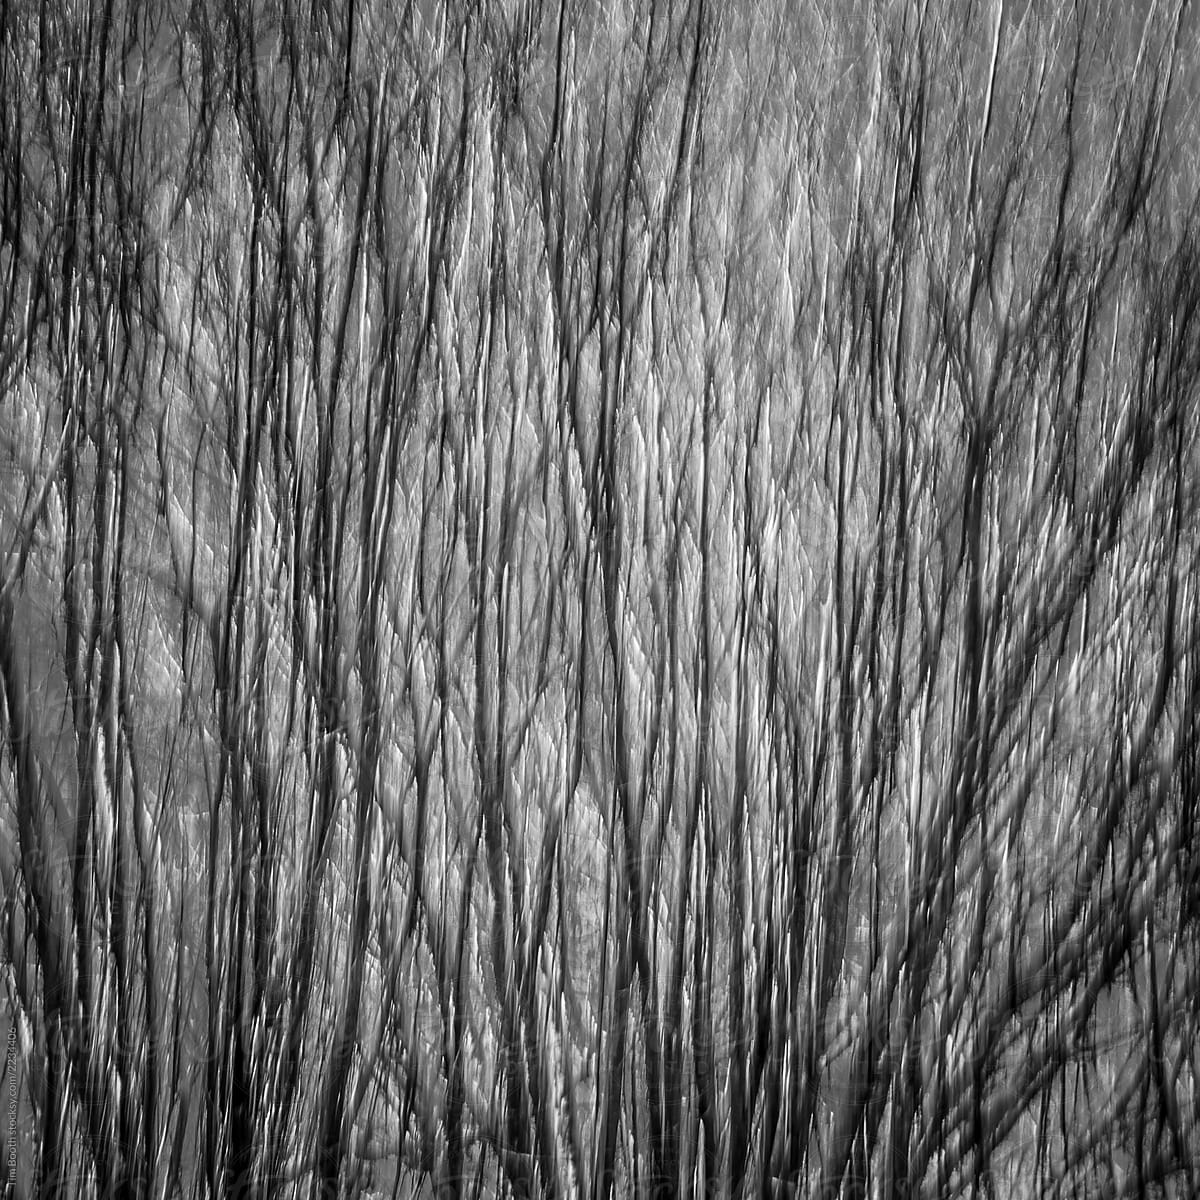 The blurred texture of winter trees